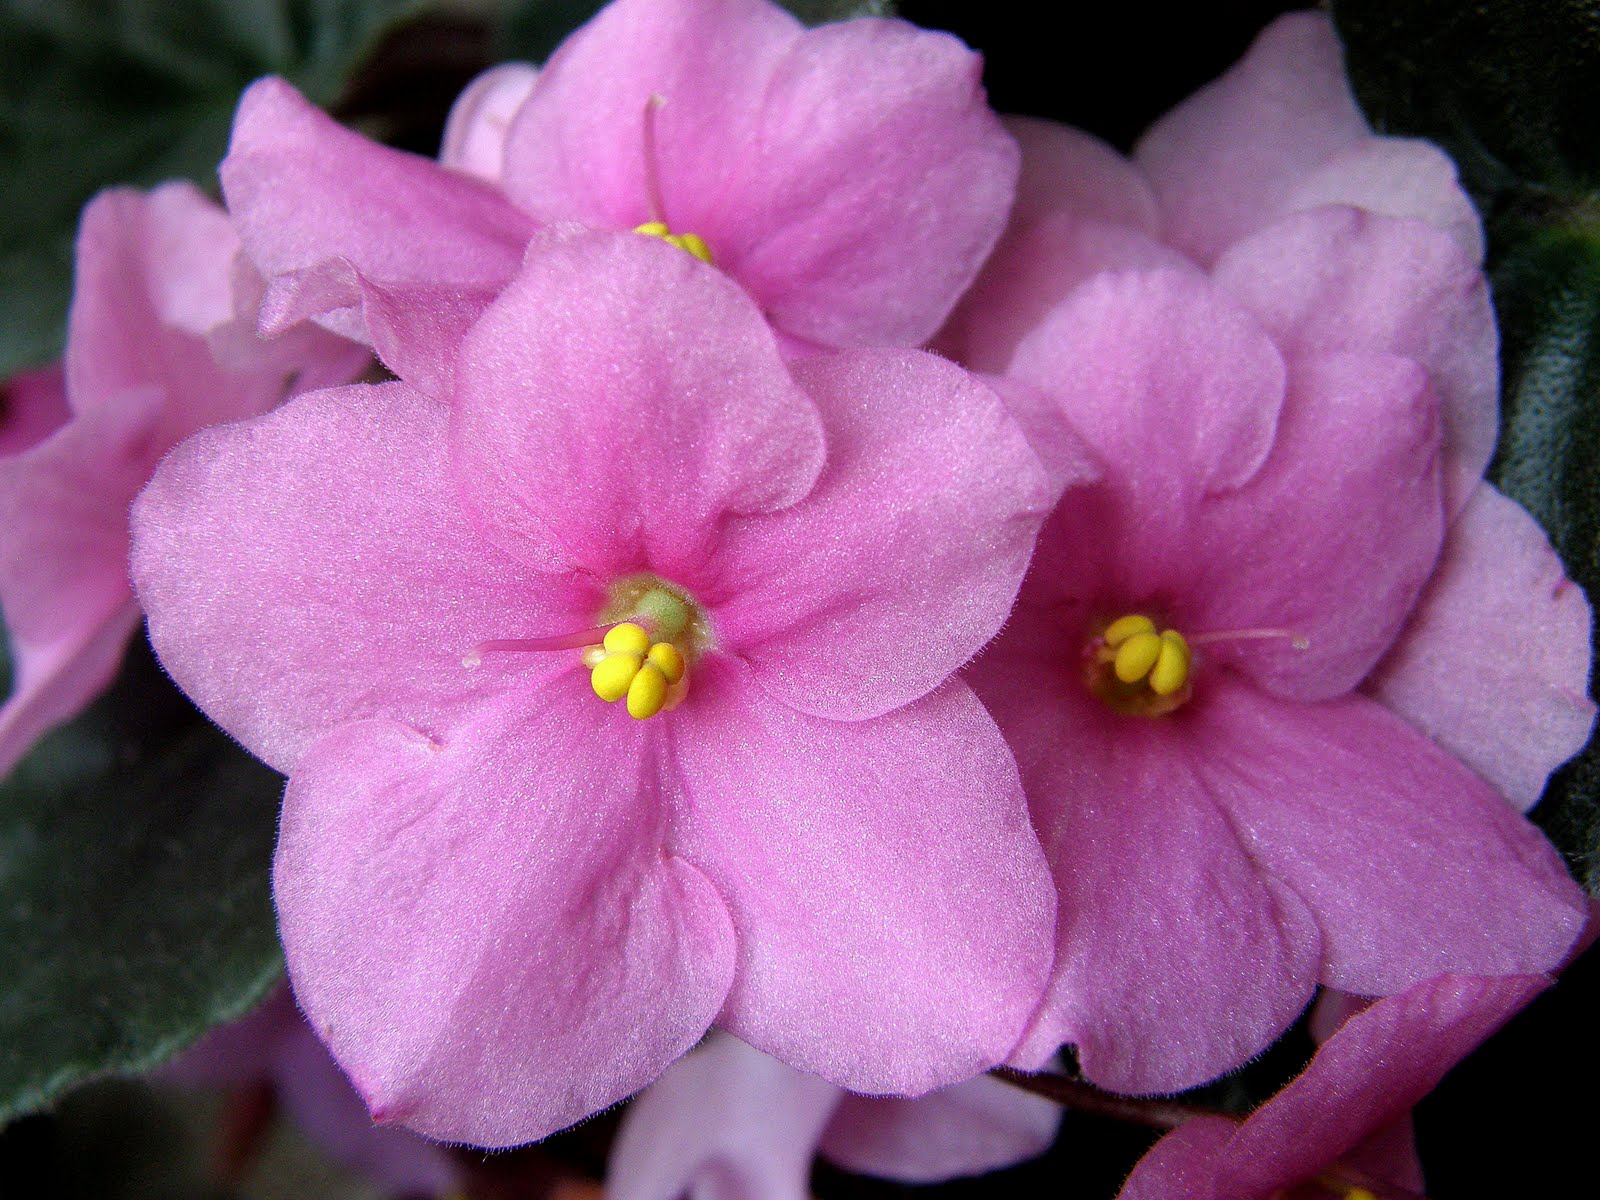 MHM photos: African violet in a pink tone.